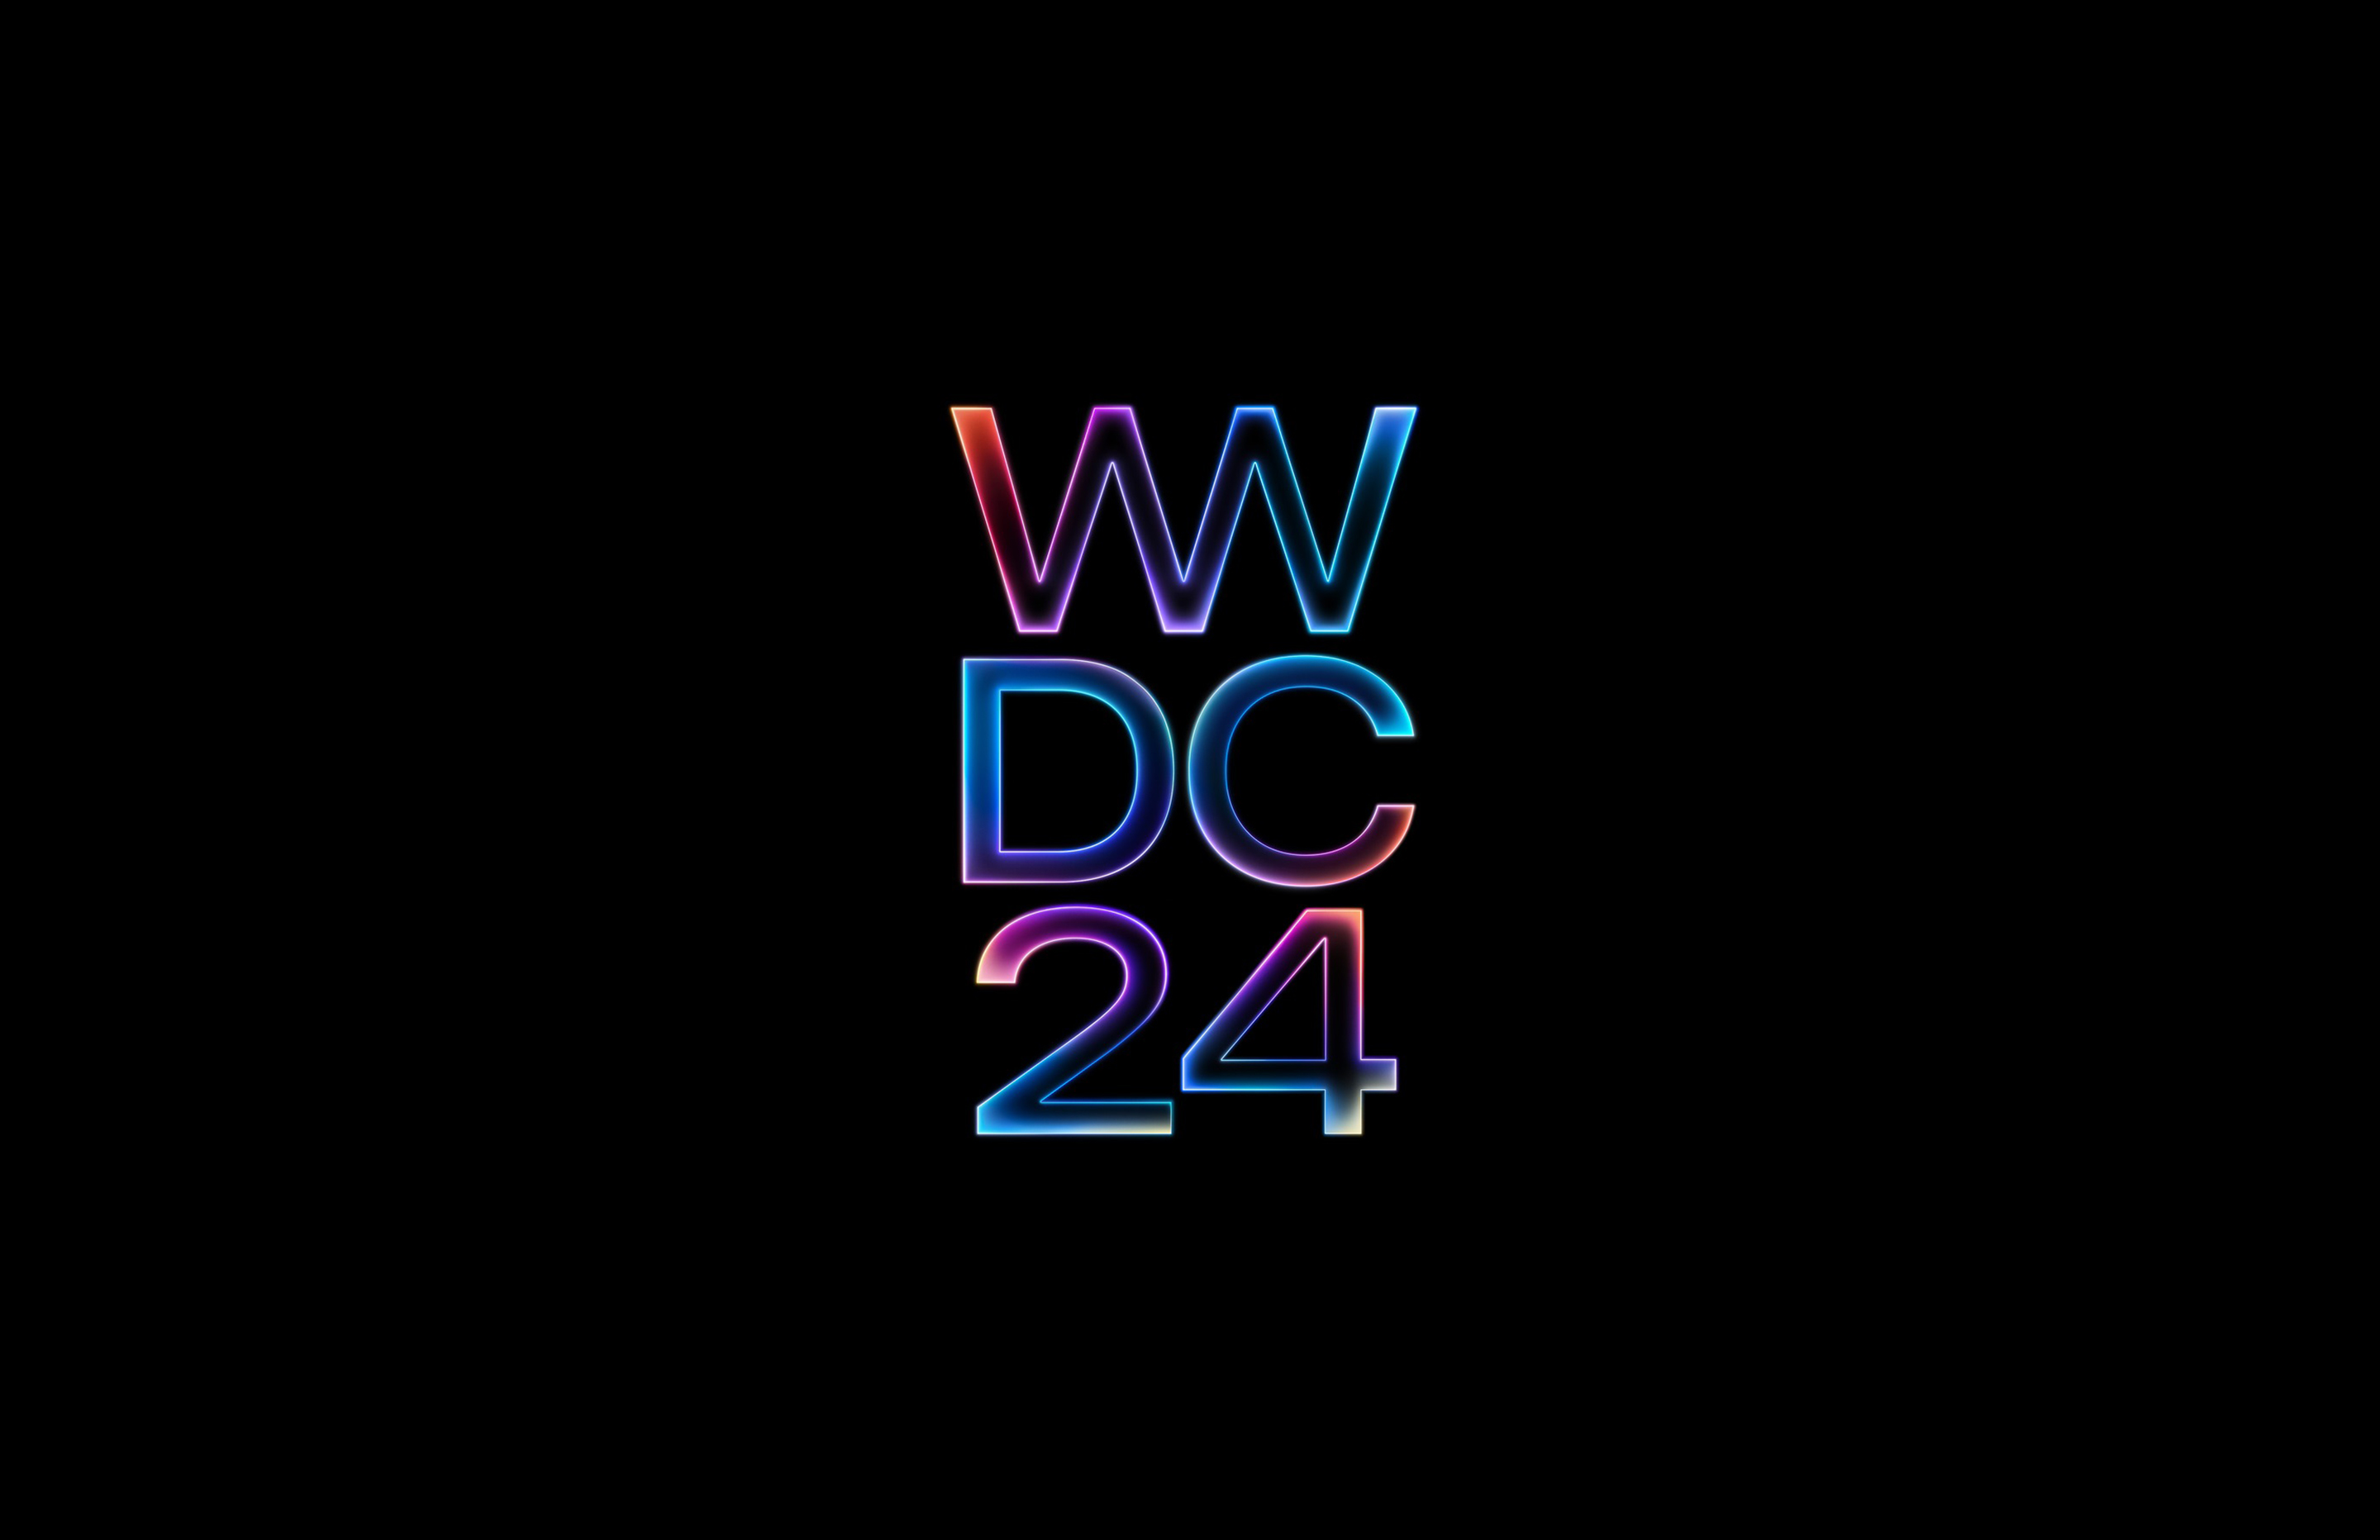 Apple WWDC 2024 wallpaper Resolution 2880x1864 | Best Download this awesome wallpaper - Cool Wallpaper HD - CoolWallpaper-HD.com